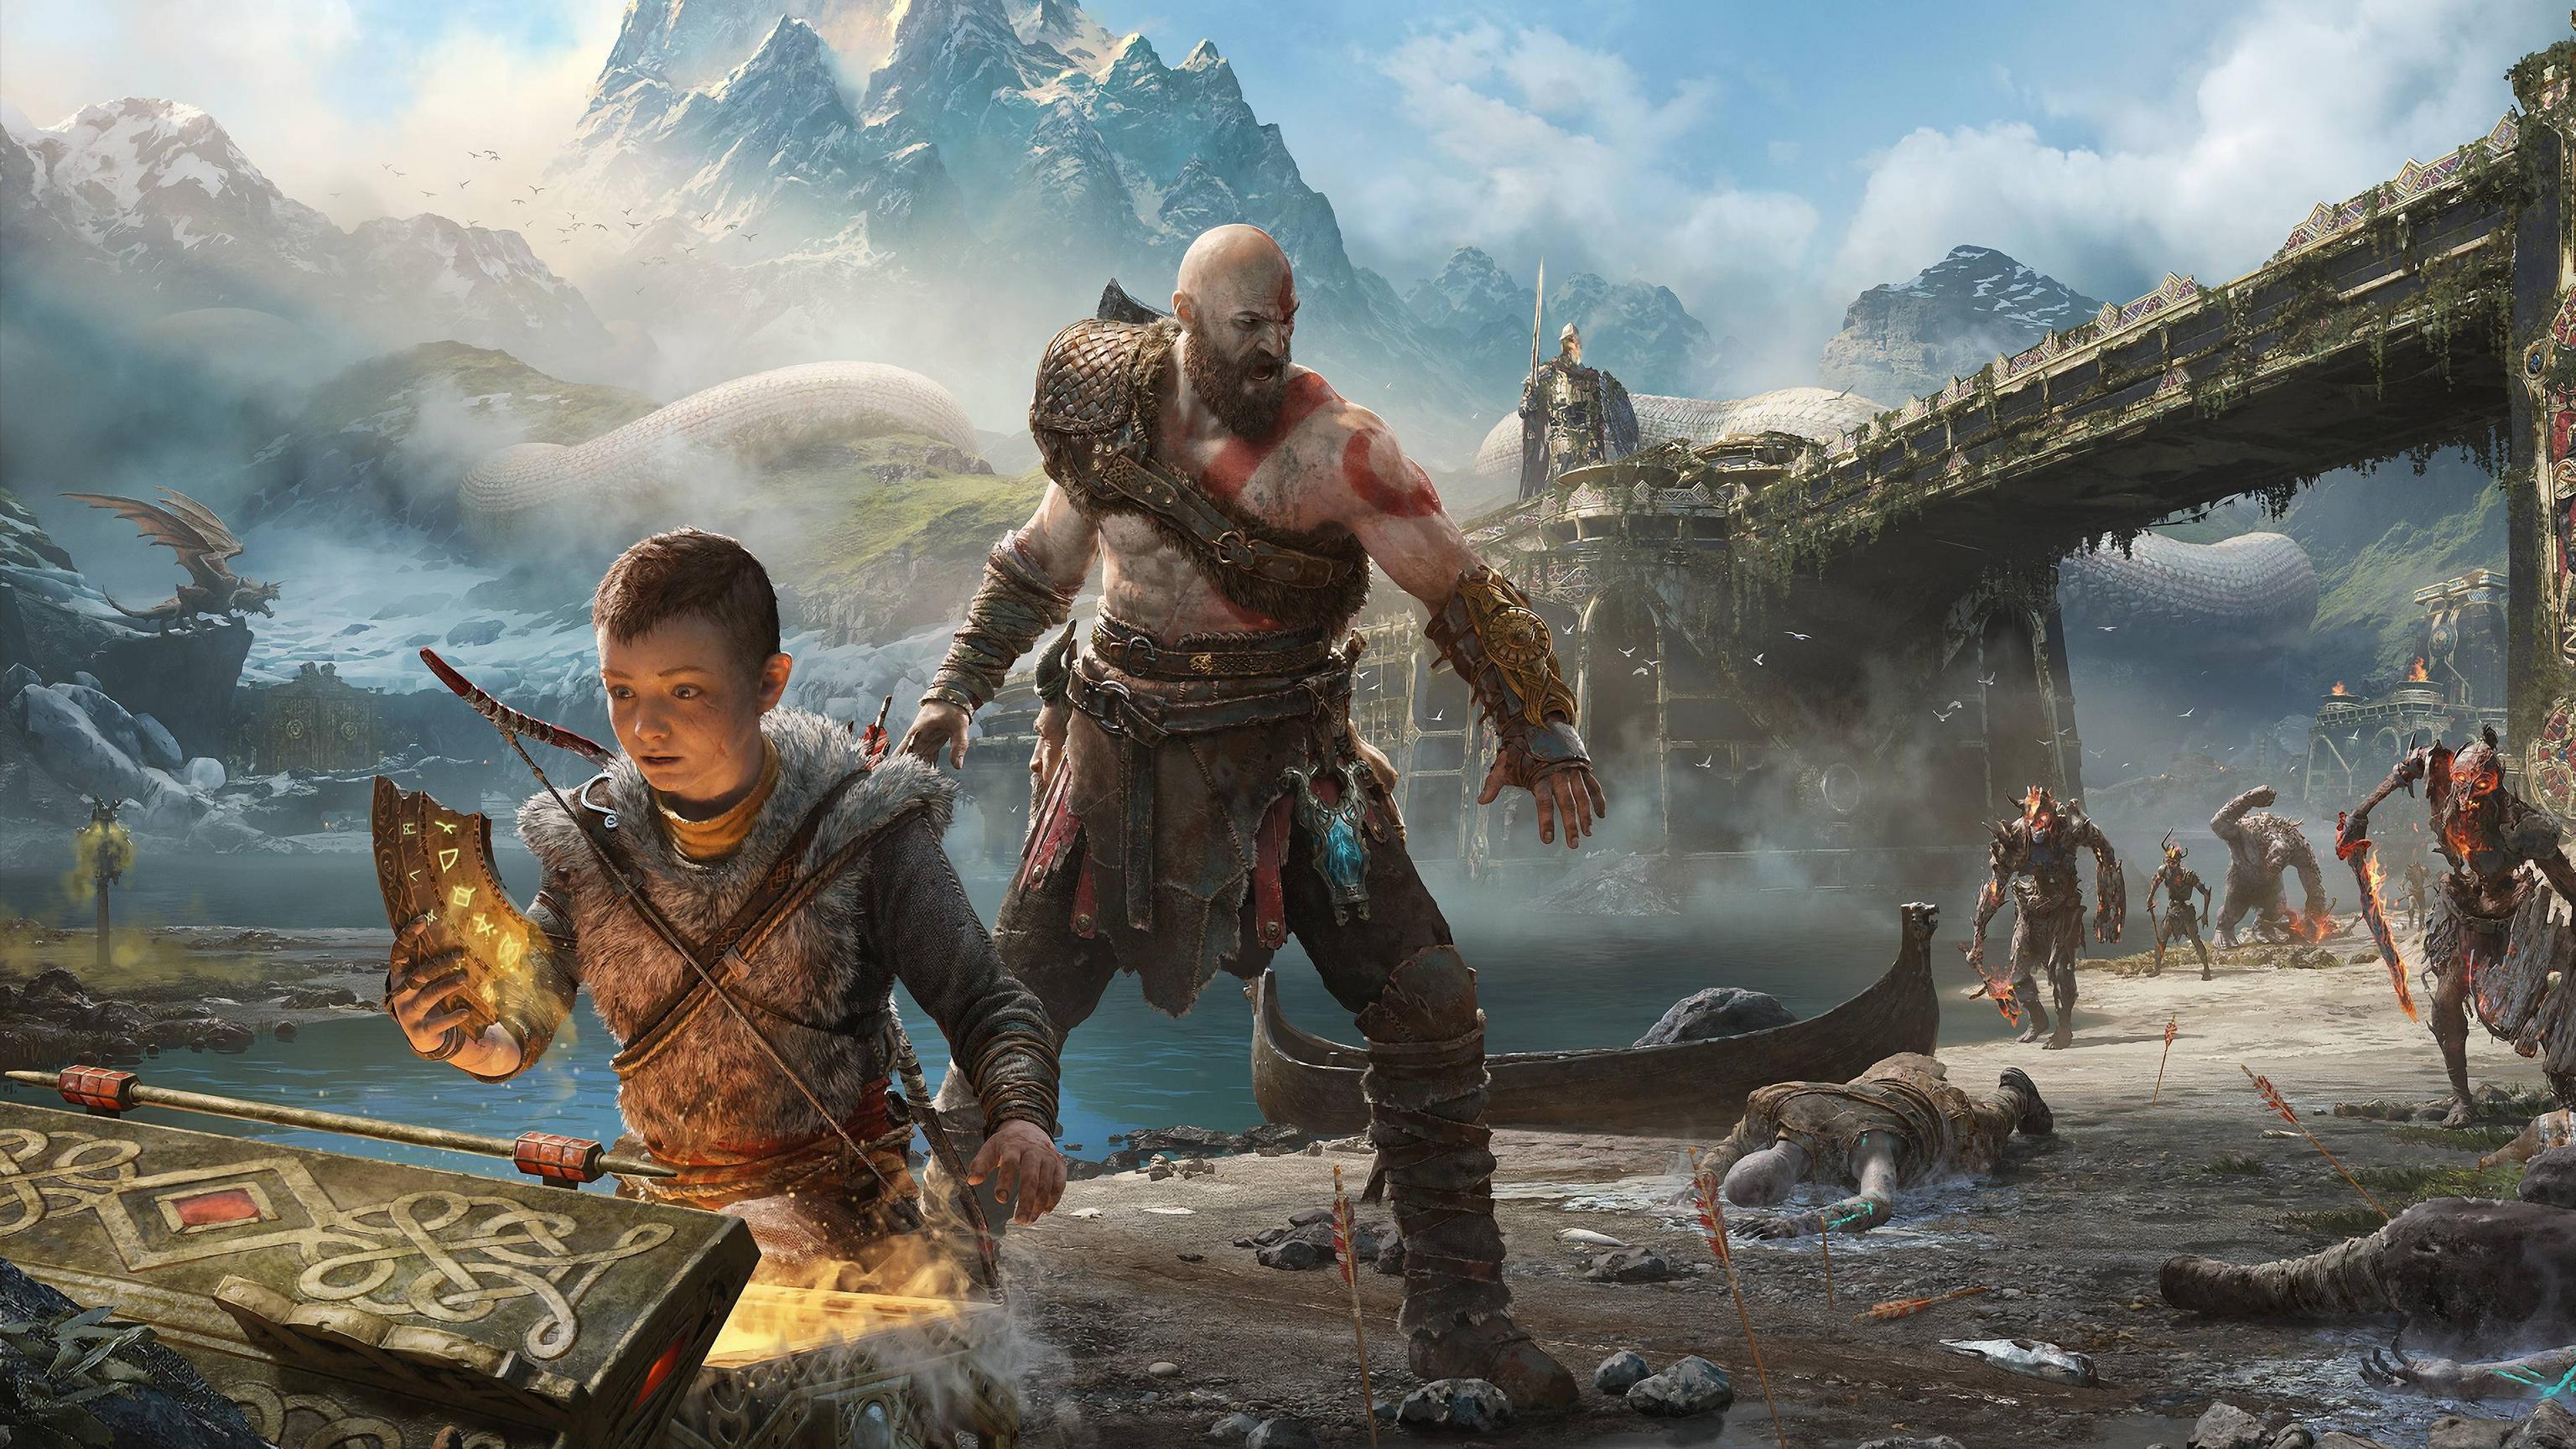 I found this after searching for a 4K GoW wallpaper and it's to good